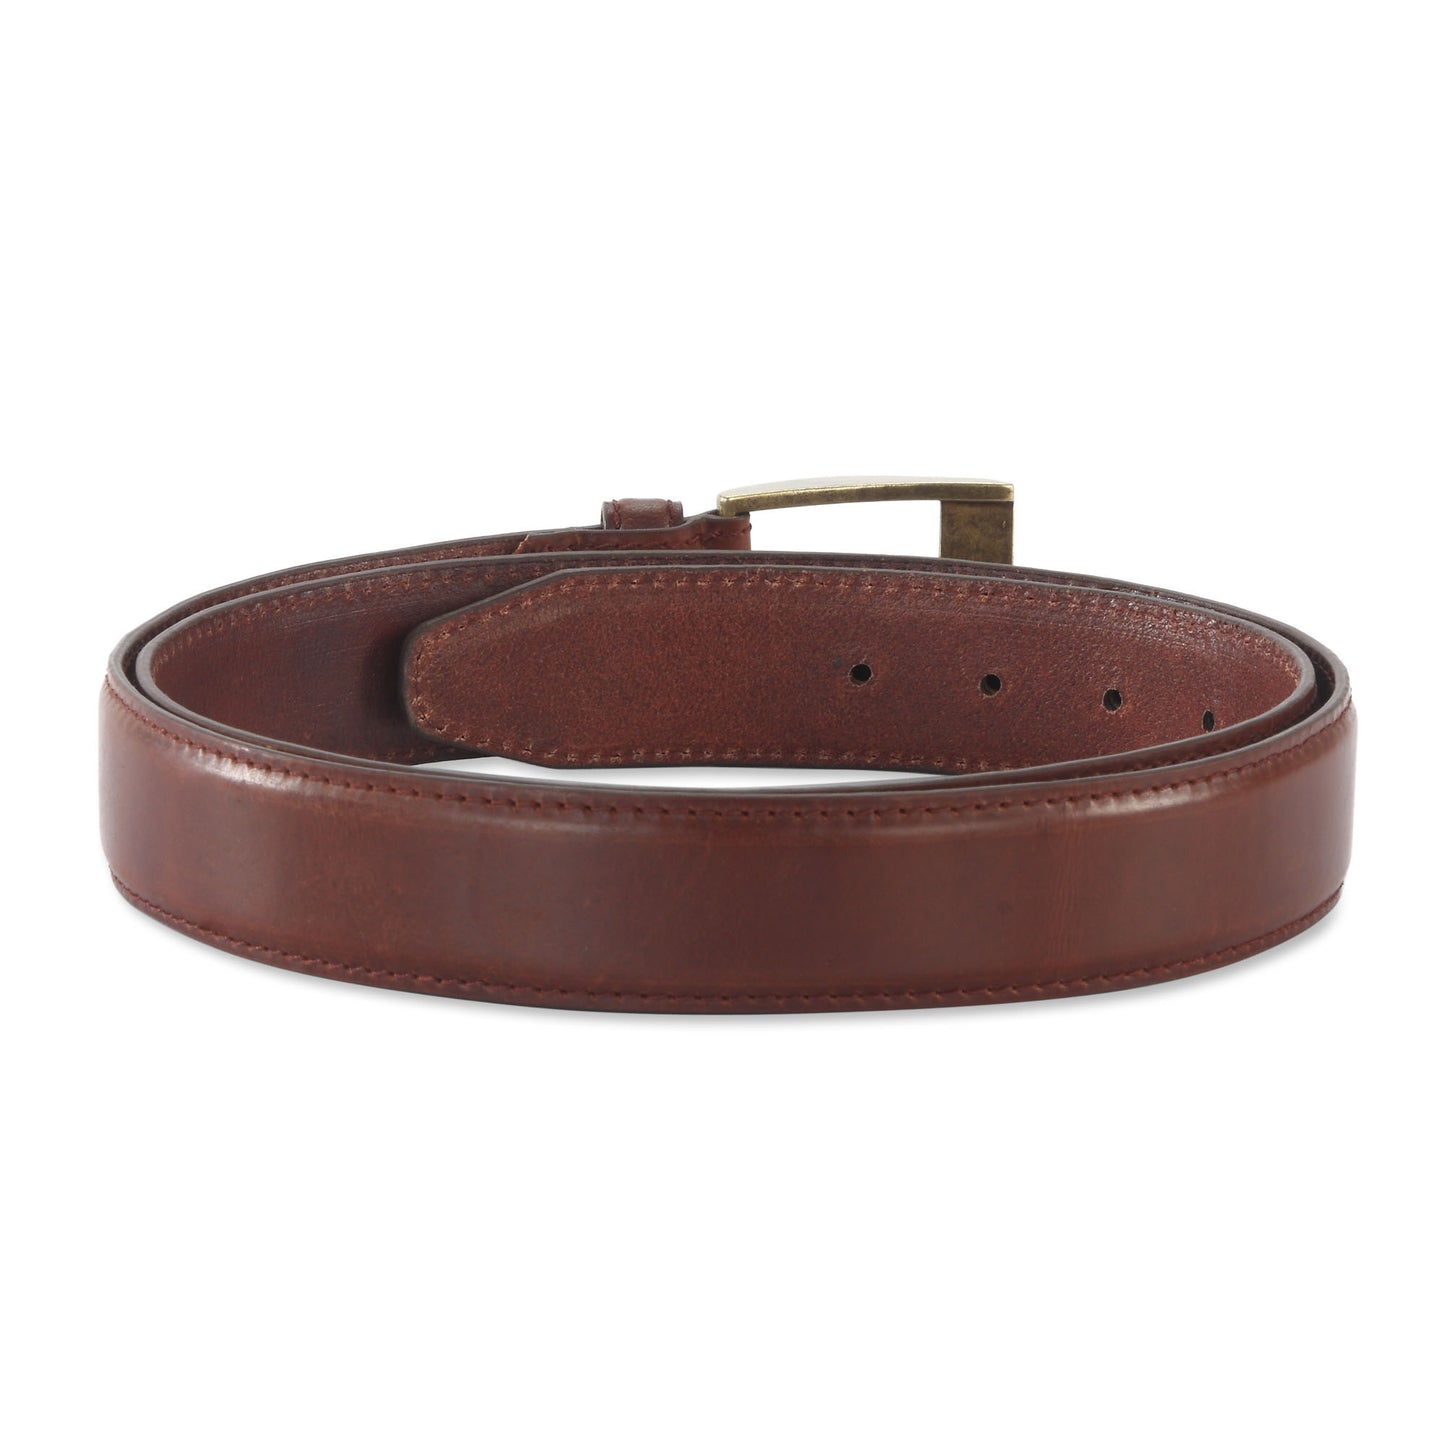 391903 - one and a half inch wide leather belt in brandy color top grain leather - back view